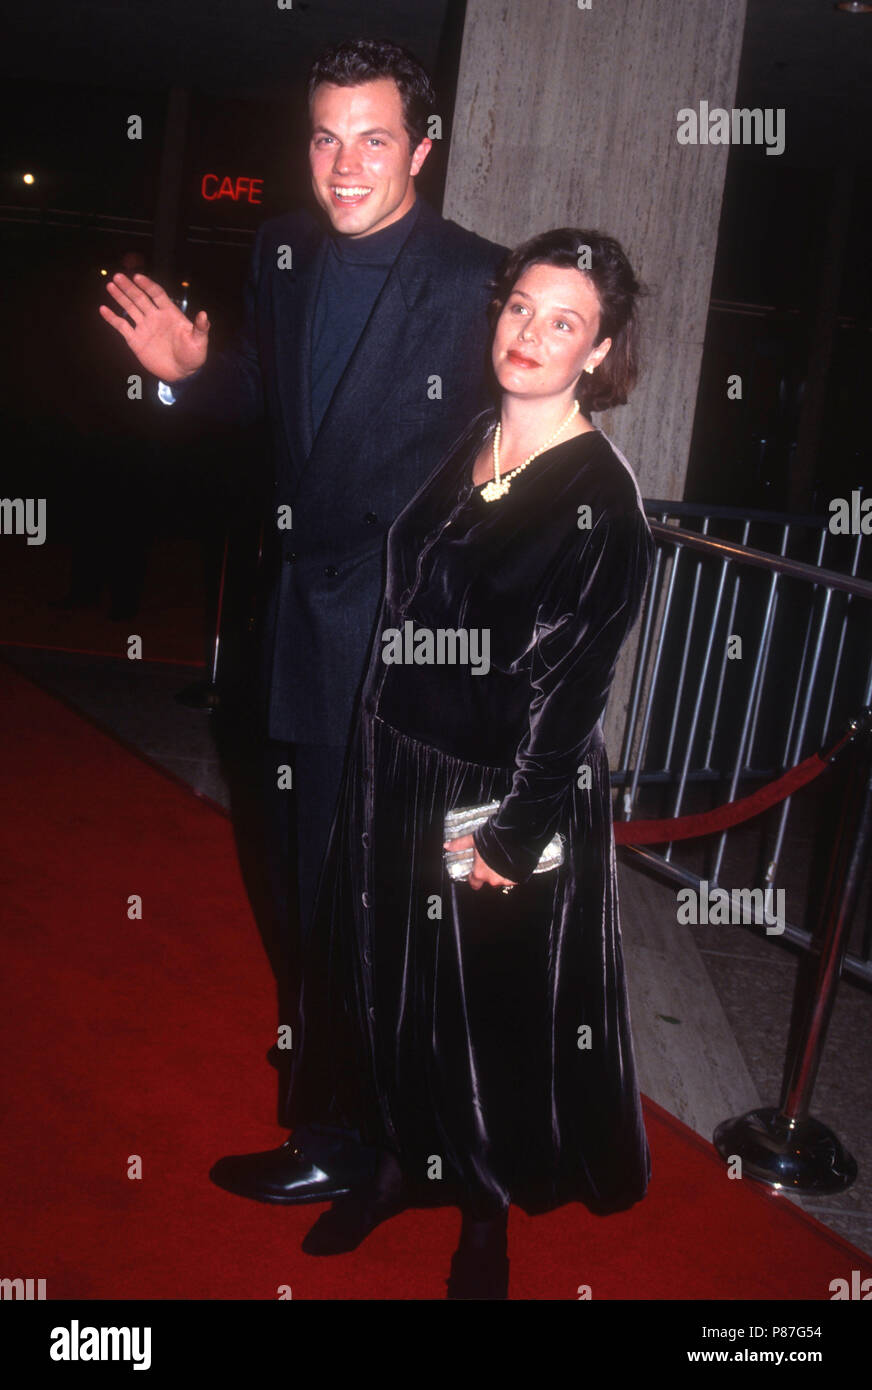 CENTURY CITY, CA - FEBRUARY 20: (L-R) Actor Adam Baldwin and wife Ami Julius attend the Los Angeles Premiere of 'Radio Flyer' on February 20, 1992 at Cineplex Odeon Century Plaza Cinemas in Century City, California. Photo by Barry King/Alamy Stock Photo Stock Photo